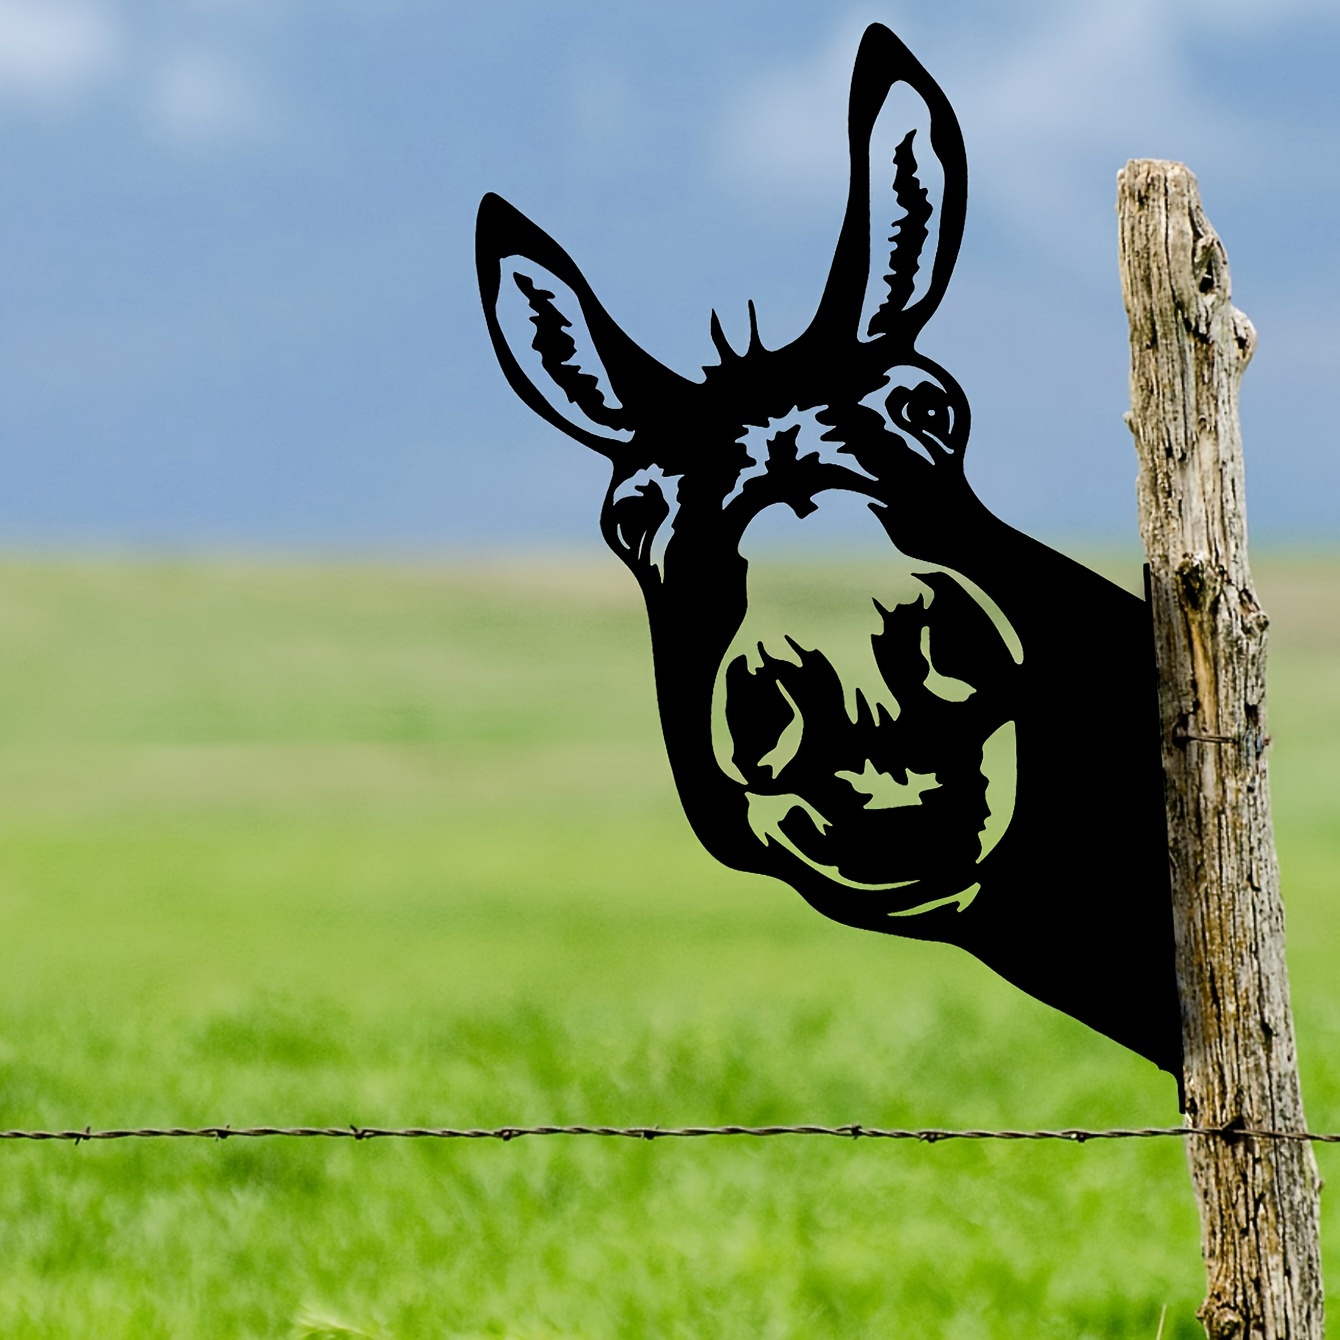 

Vintage Donkey Head Iron Silhouette - Add A Cute Farmhouse Touch To Your Garden Fence!